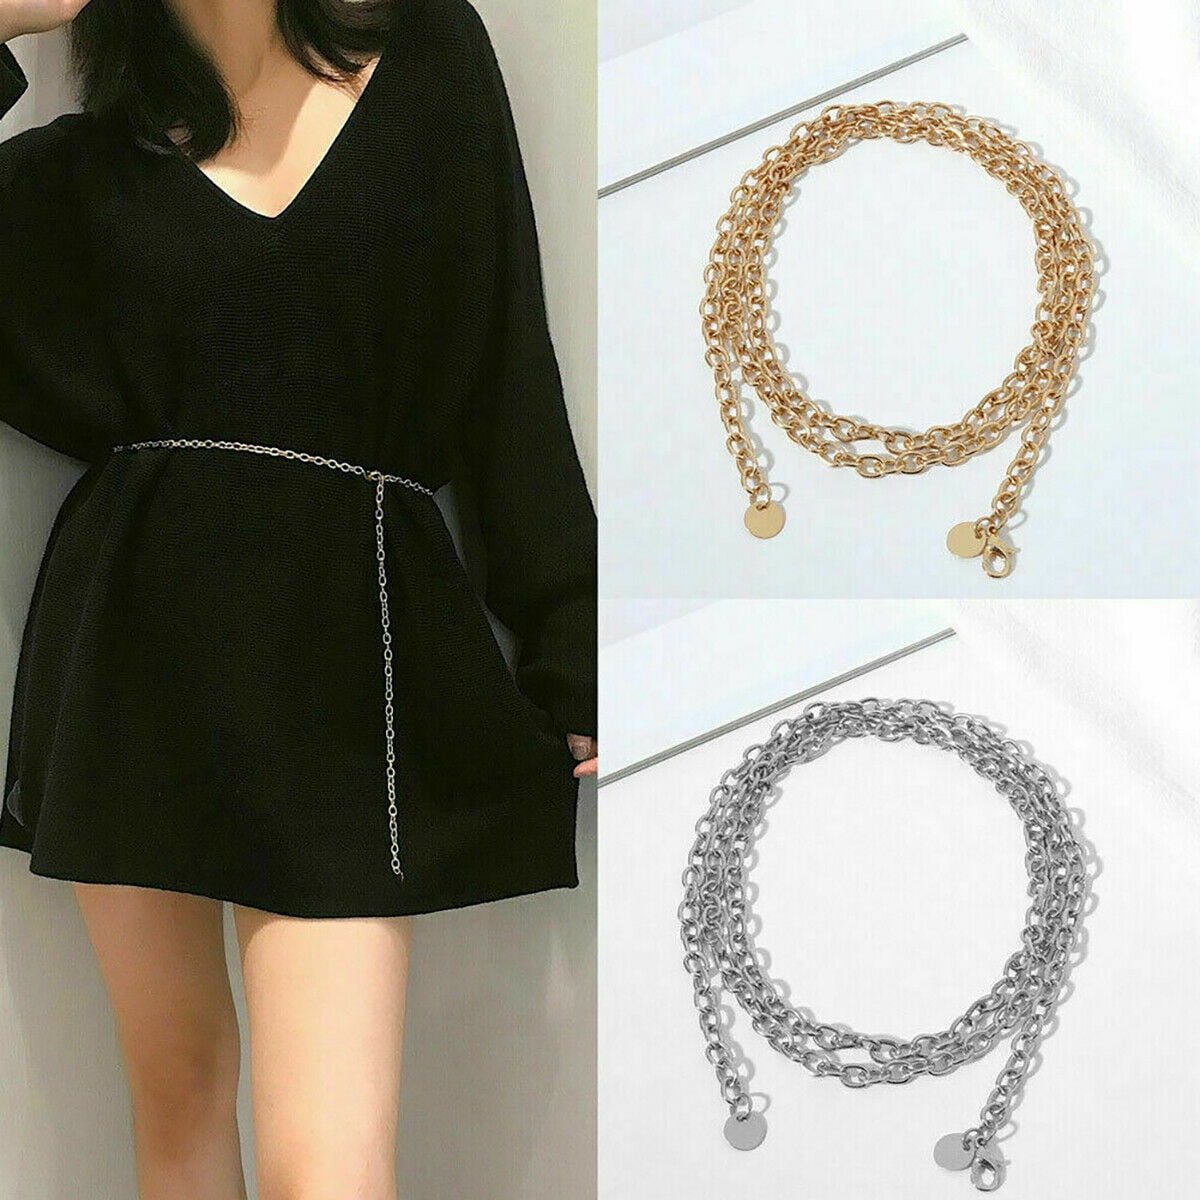 Gold Mesh Ladies Waist Chain Charm Belt For Girls Westren Outfits Dress One Size 